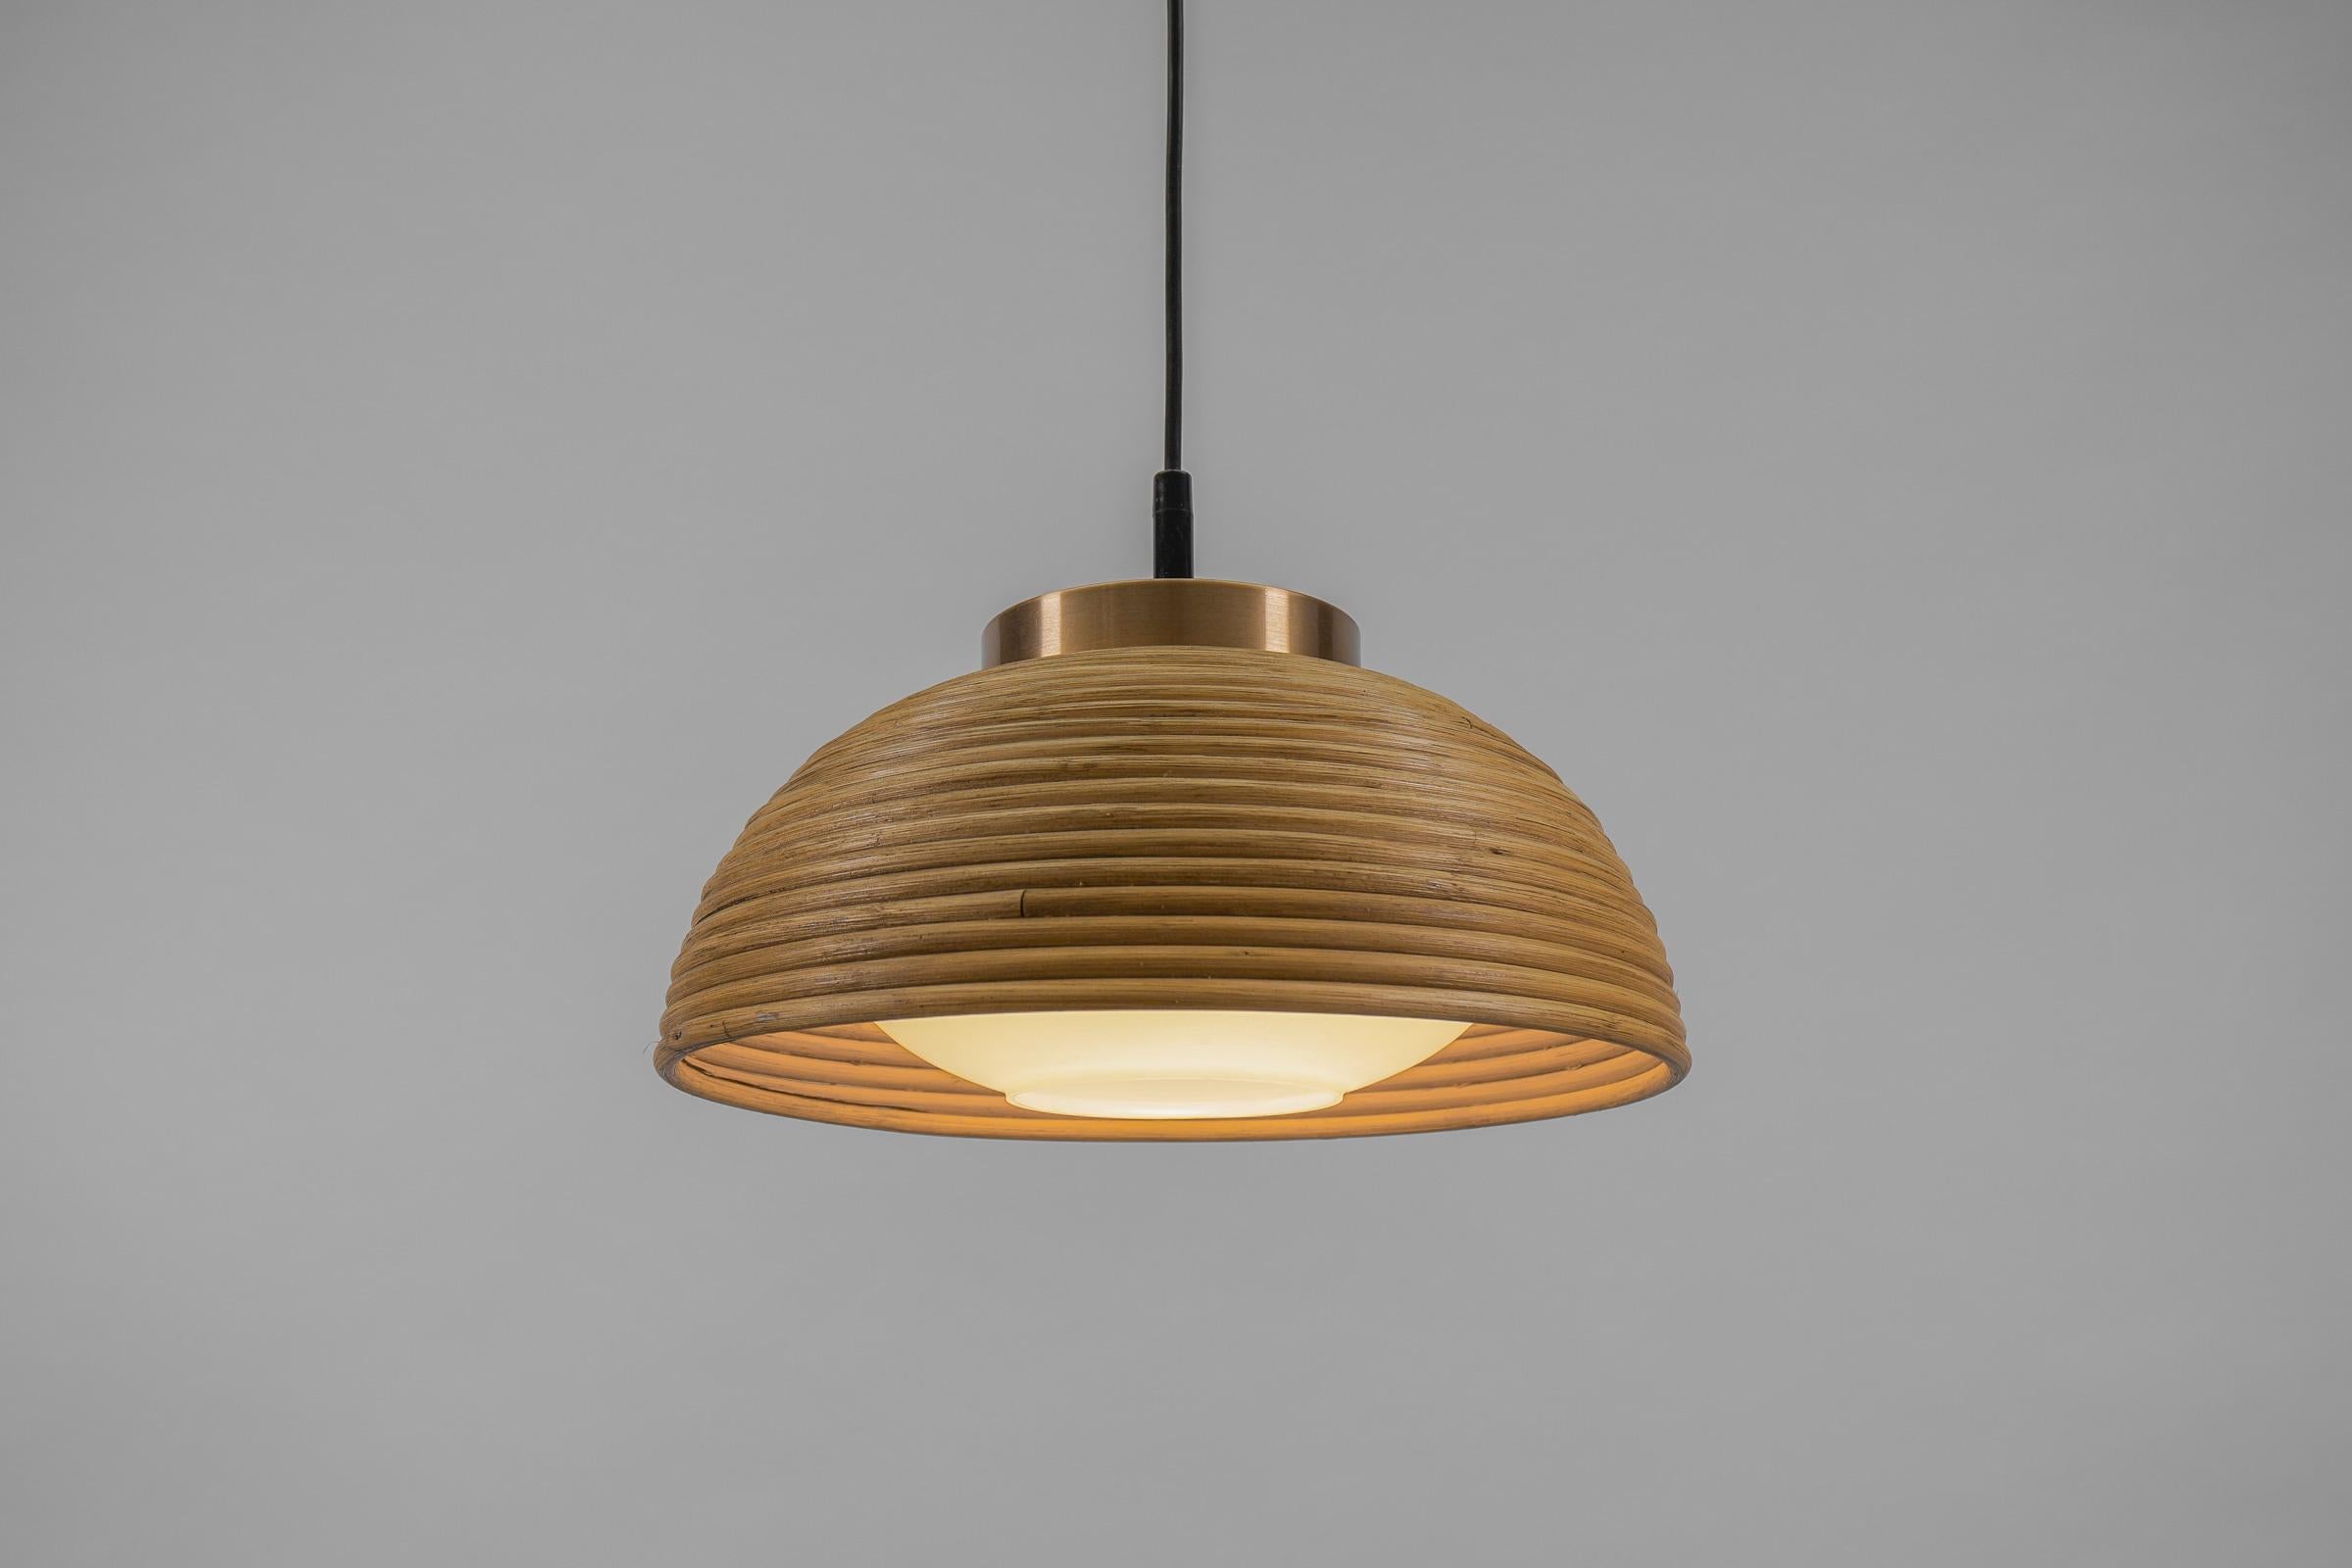 Rare and lovely decorative Mid-Century Modern pendant lamp. 

Height adjustable from about 35cm to 95cm.

Executed in rattan, opaline glass and copper. The pendant lamp comes with 1 x E27 / E26 Edison screw fit bulb holder, is wired and in working